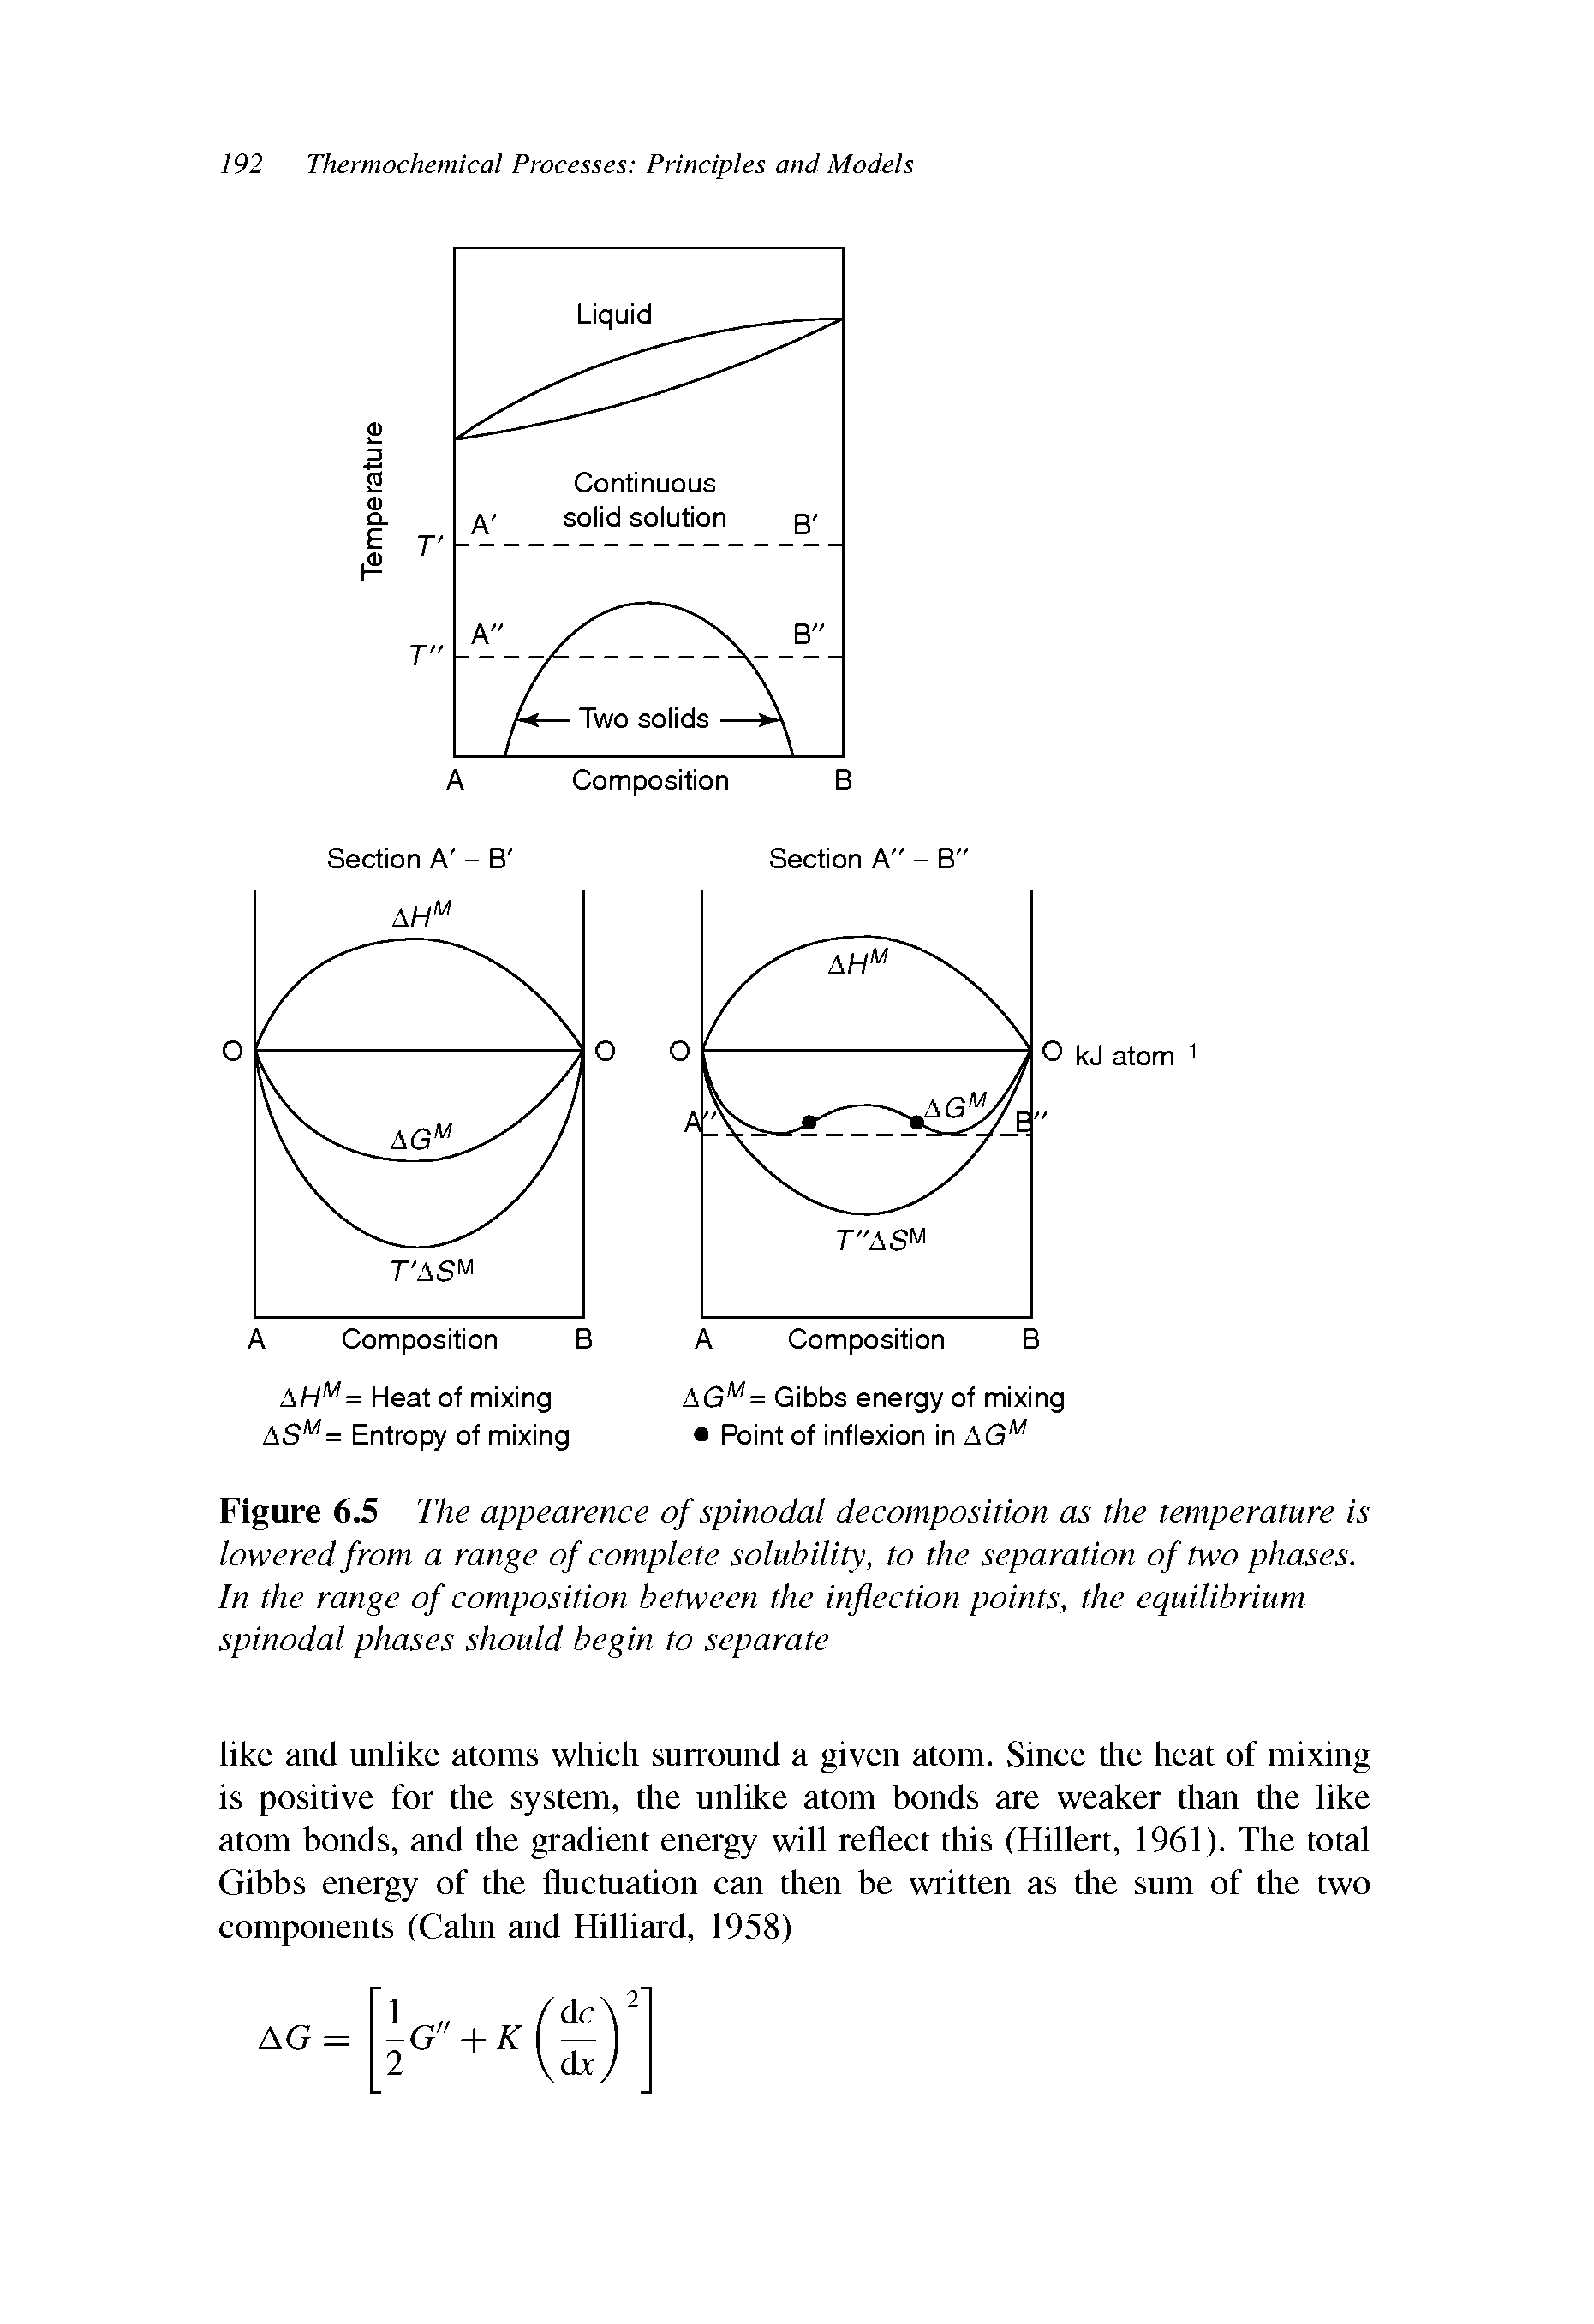 Figure 6.5 The appearence of spinodal decomposition as the temperature is lowered from a range of complete solubility, to the separation of two phases. In the range of composition between the inflection points, the equilibrium spinodal phases should begin to separate...